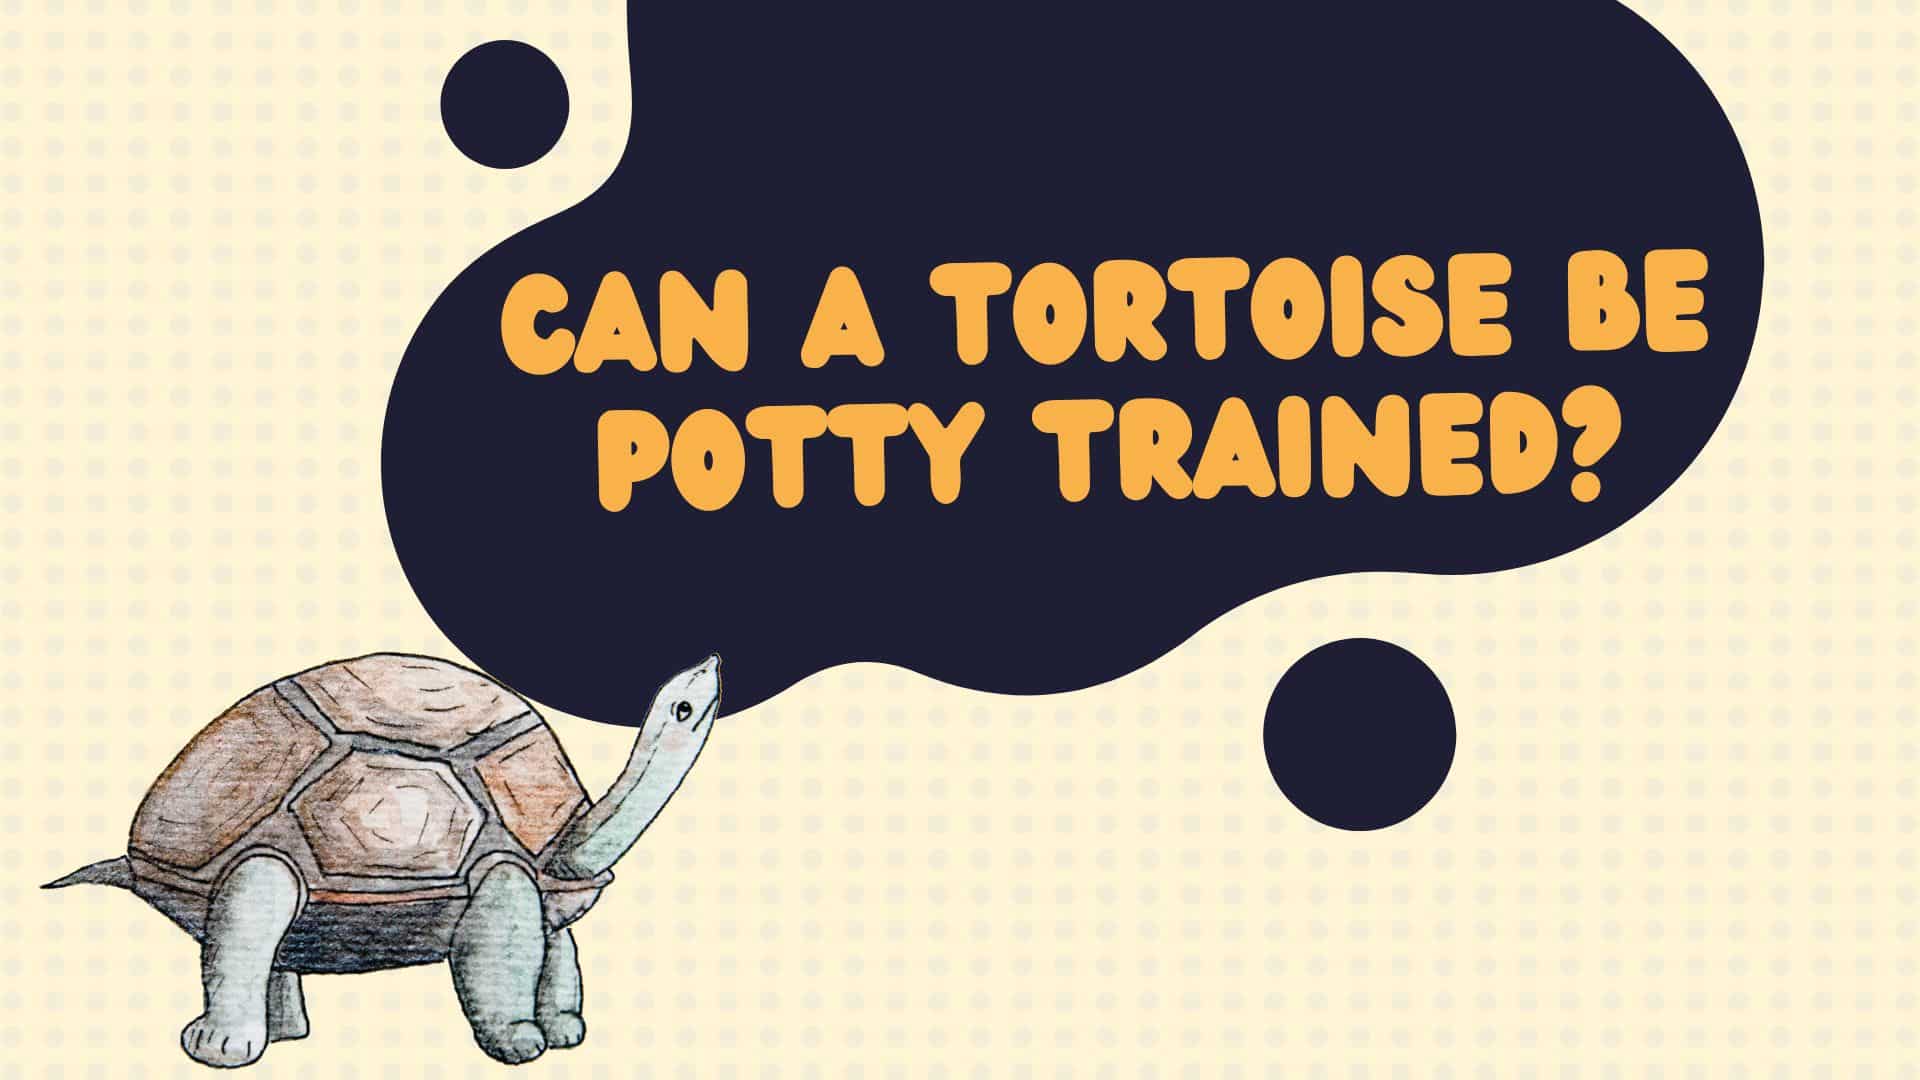 Can a Tortoise be Potty Trained